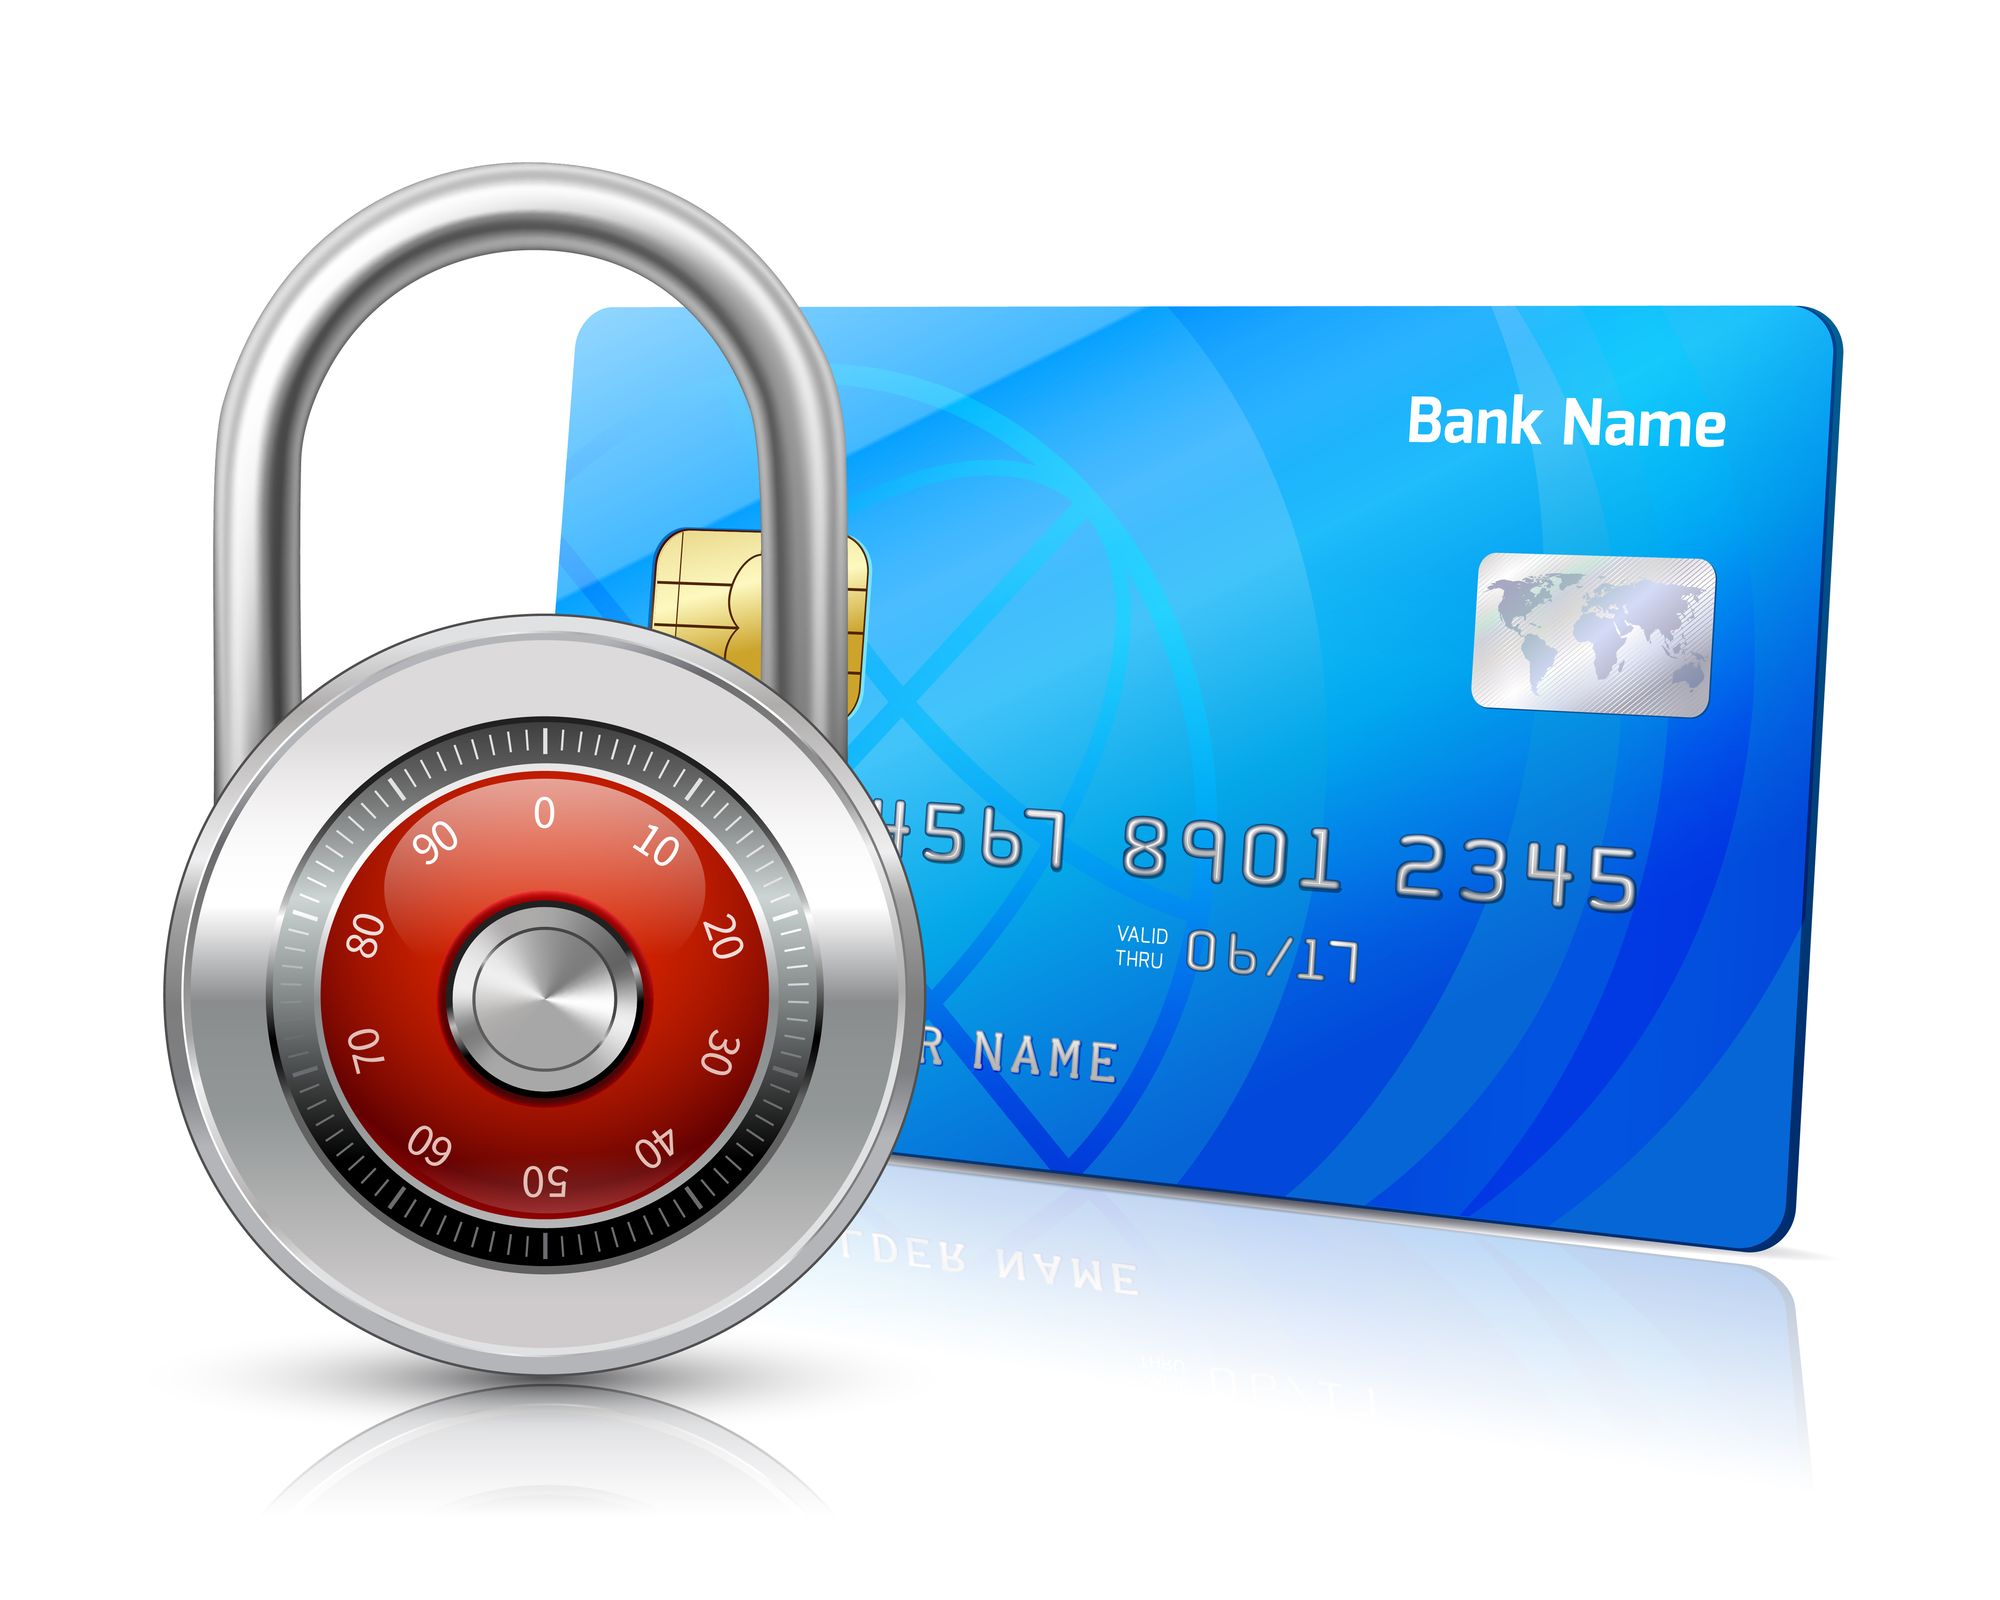 Protecting Your Online Bank Account